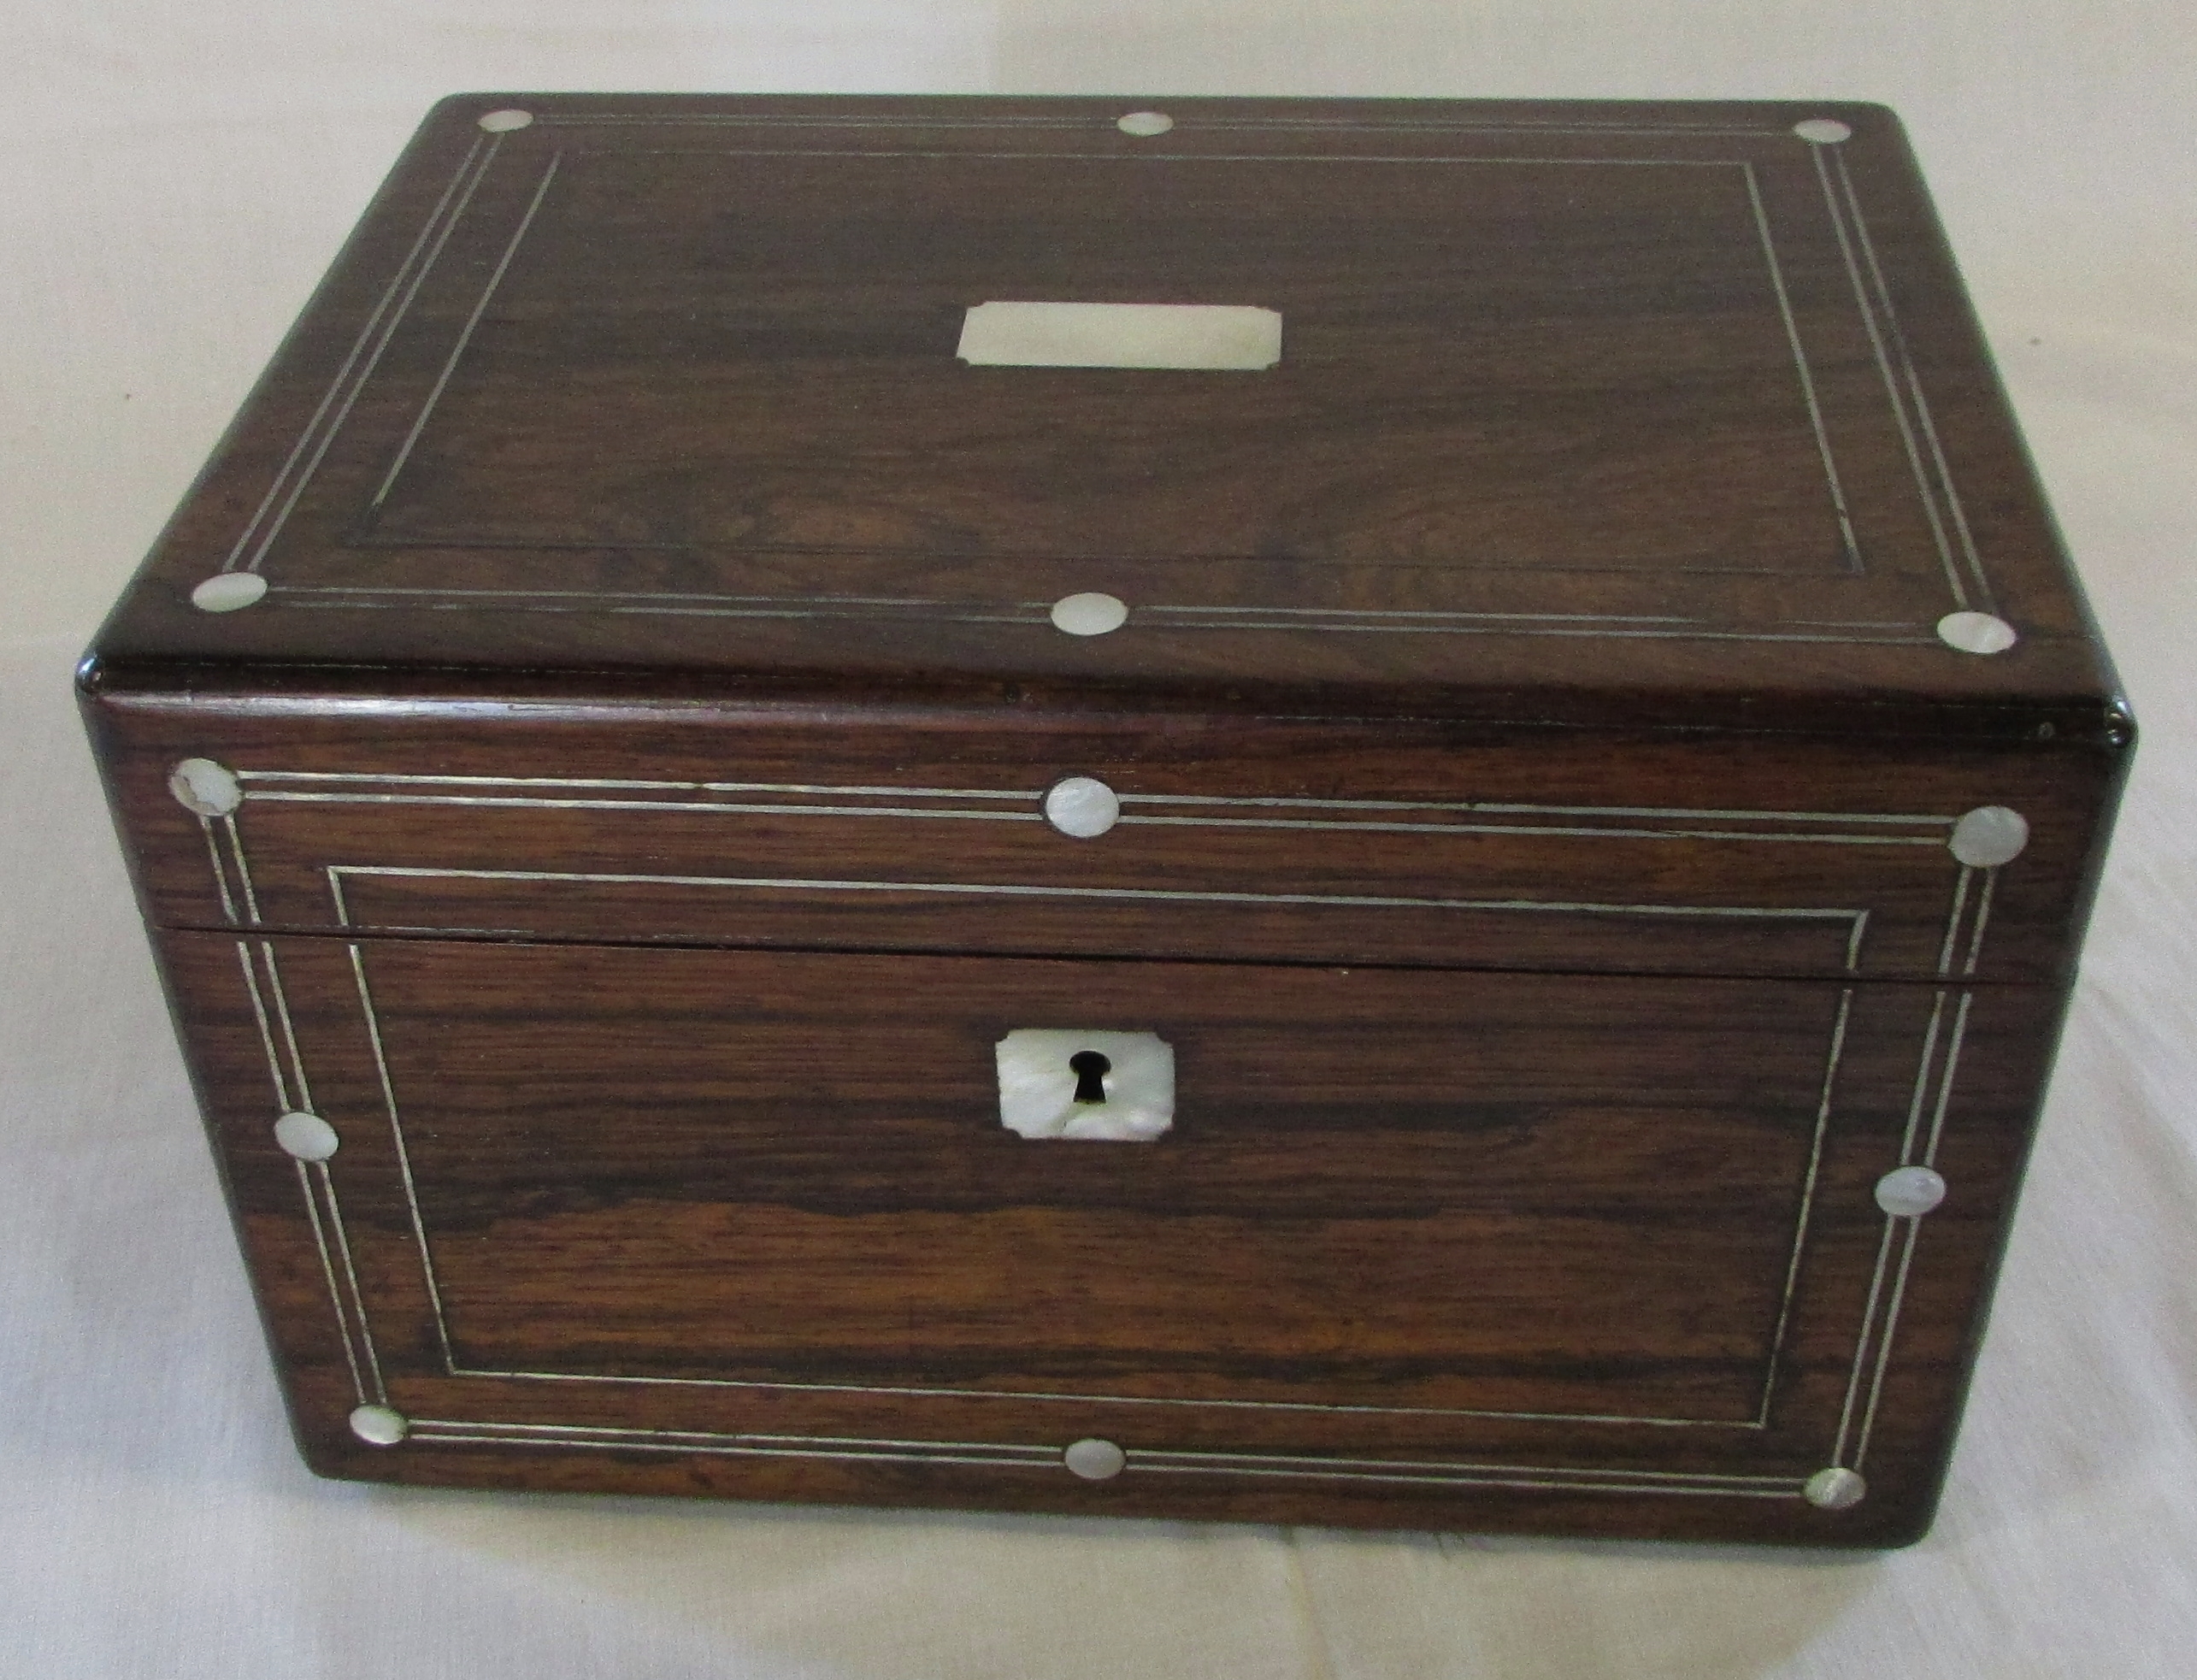 Victorian work box with mother of pearl inlay and secret drawer - Image 2 of 2